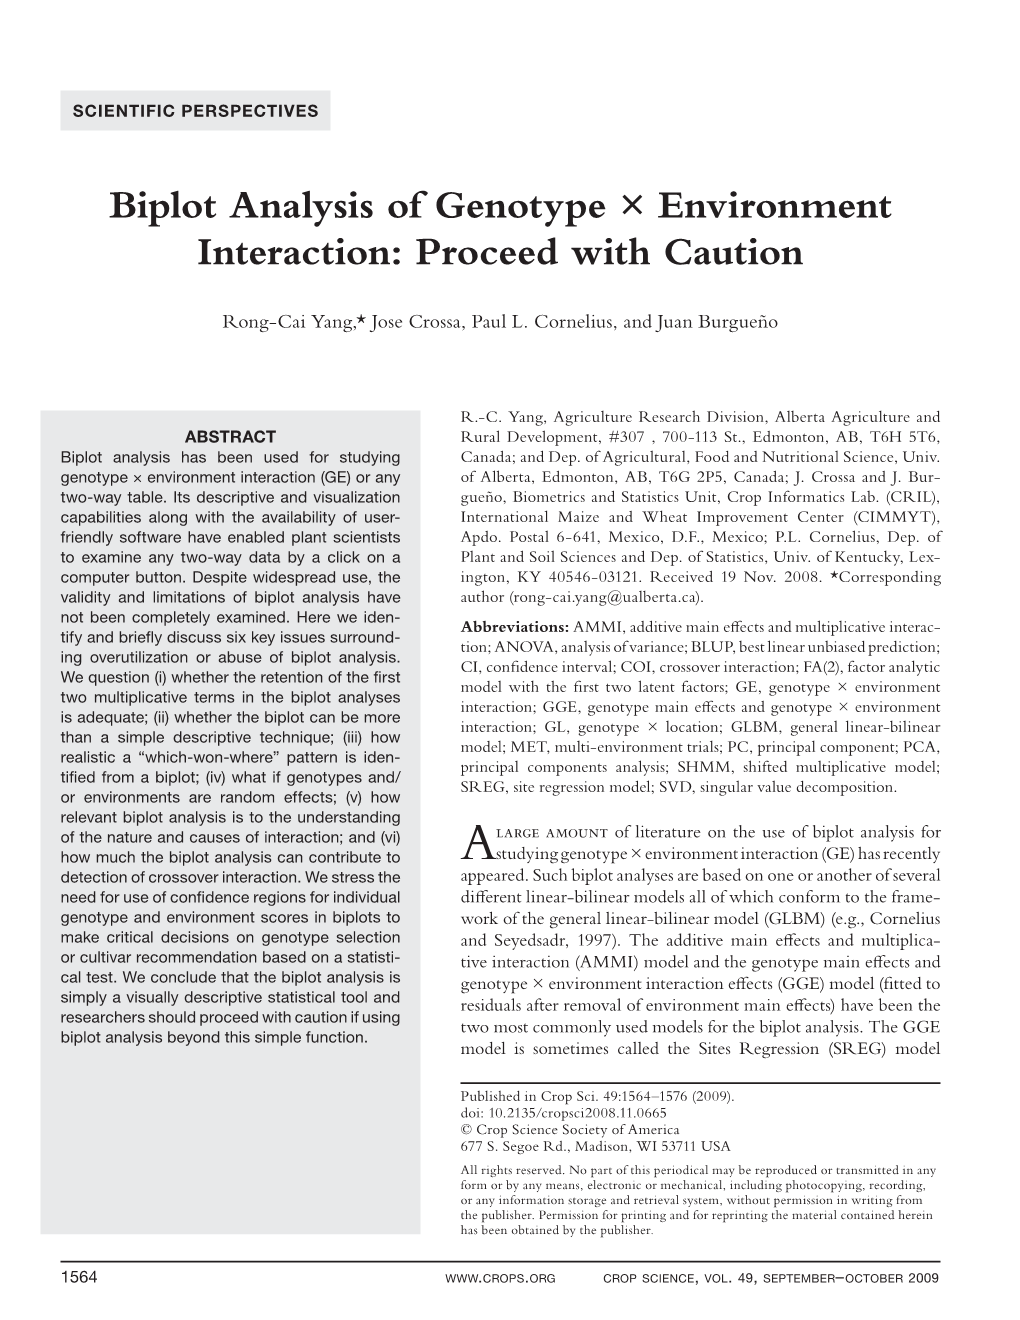 Biplot Analysis of Genotype × Environment Interaction: Proceed with Caution